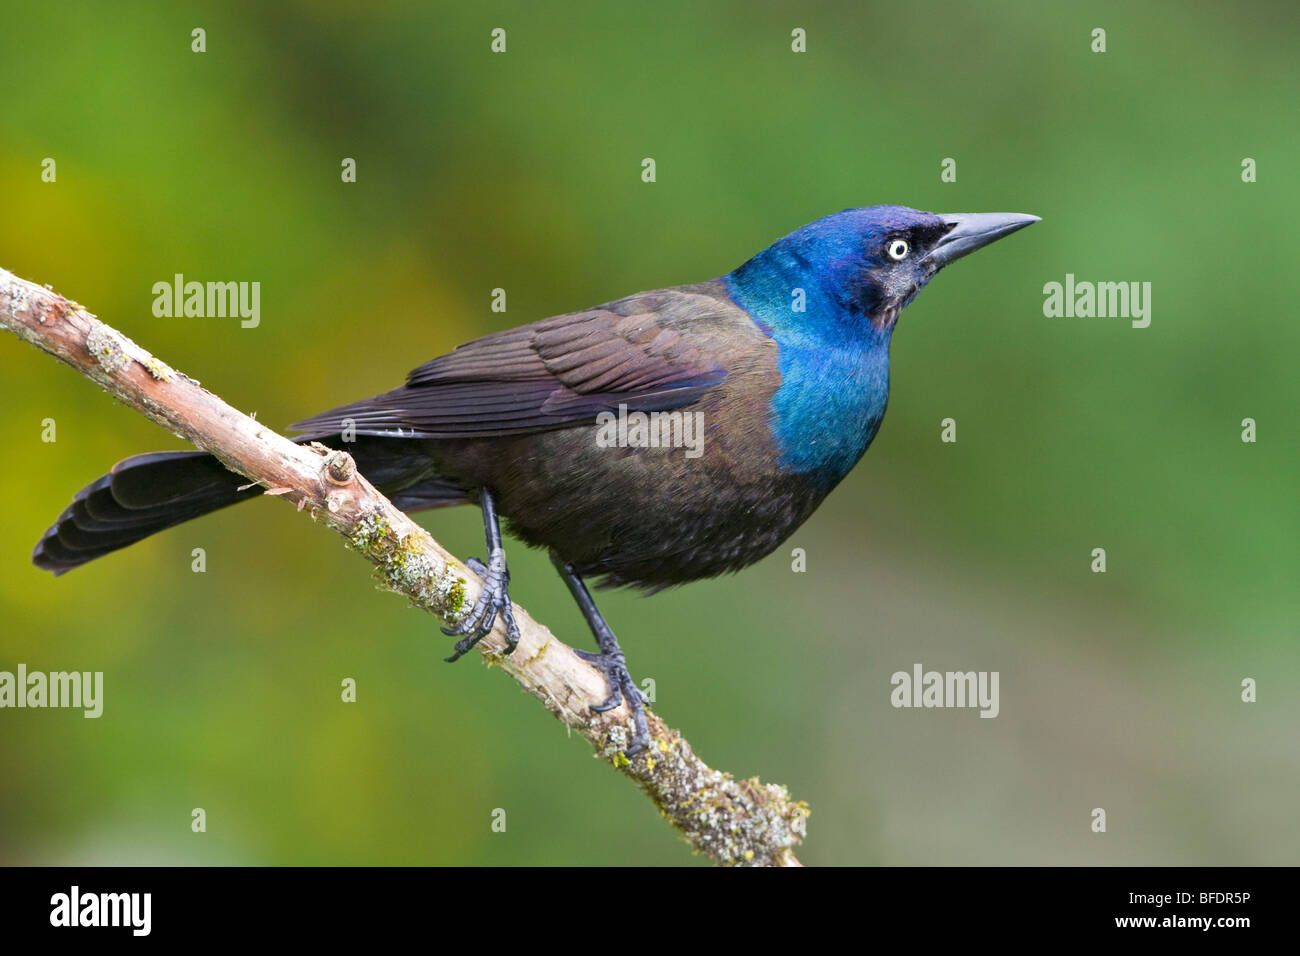 Common grackle (Quiscalus quiscula) perched on a branch near Toronto, Ontario, Canada Stock Photo